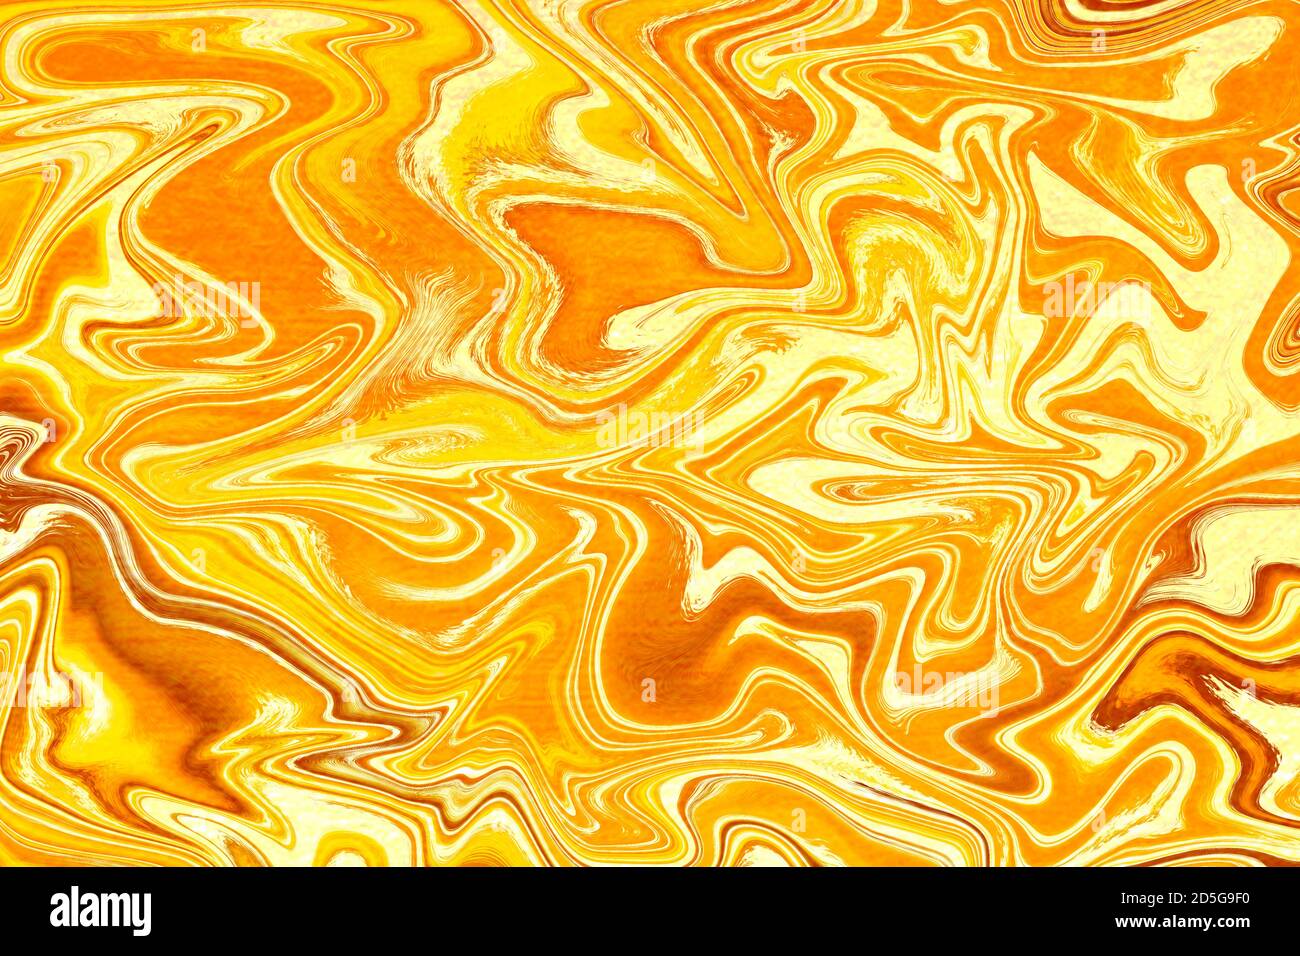 Gold liquid paint marbling wallpaper with golden gloss fluid waves  background texture Stock Photo - Alamy